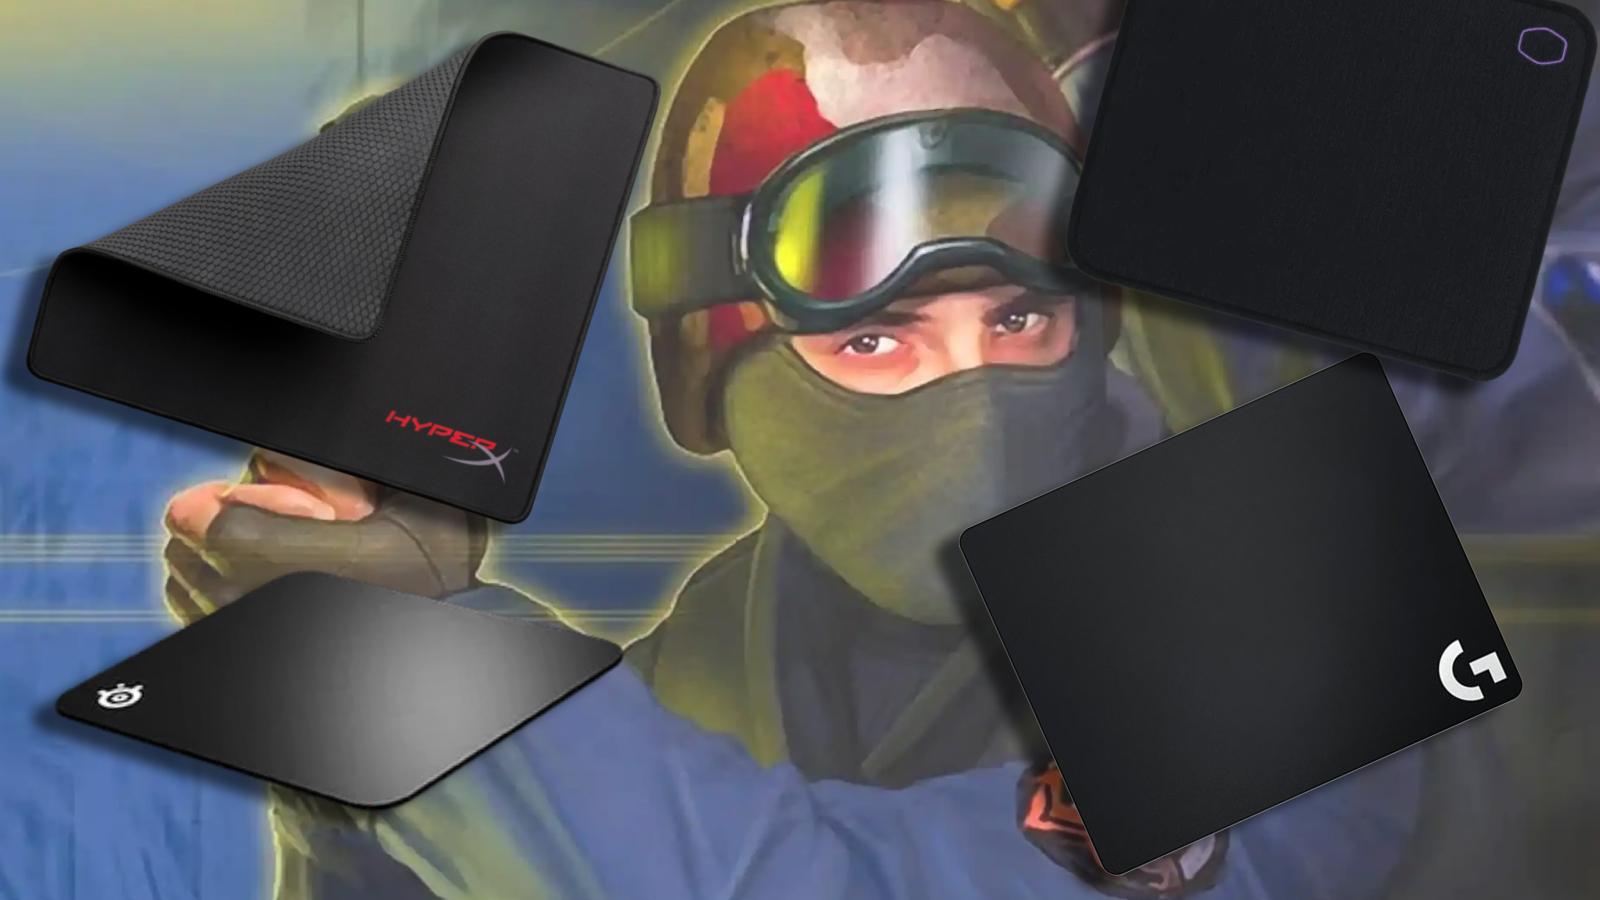 Hard vs soft mouse pad: which mouse pad is best for you?